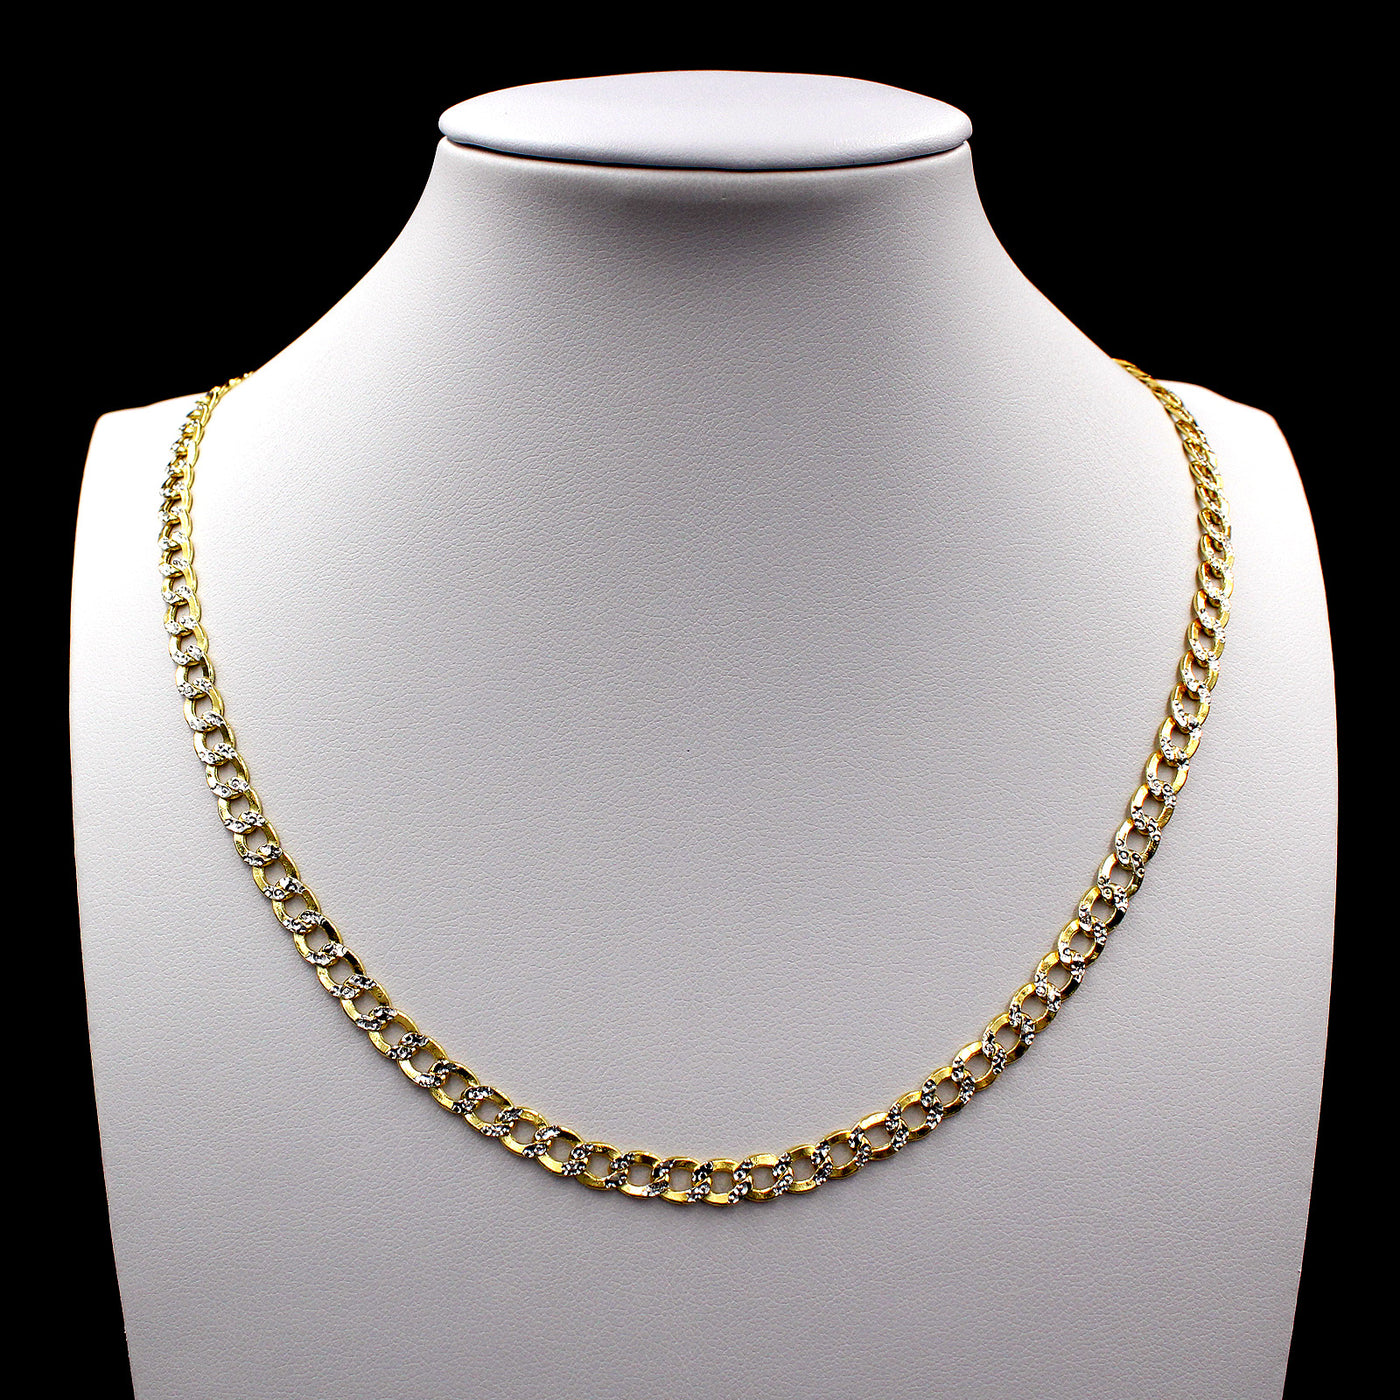 10K Solid Yellow Gold Diamond Cut Pave Cuban Link Chain Necklace 4.5MM 16" 18" 20" 22" 24" 26"